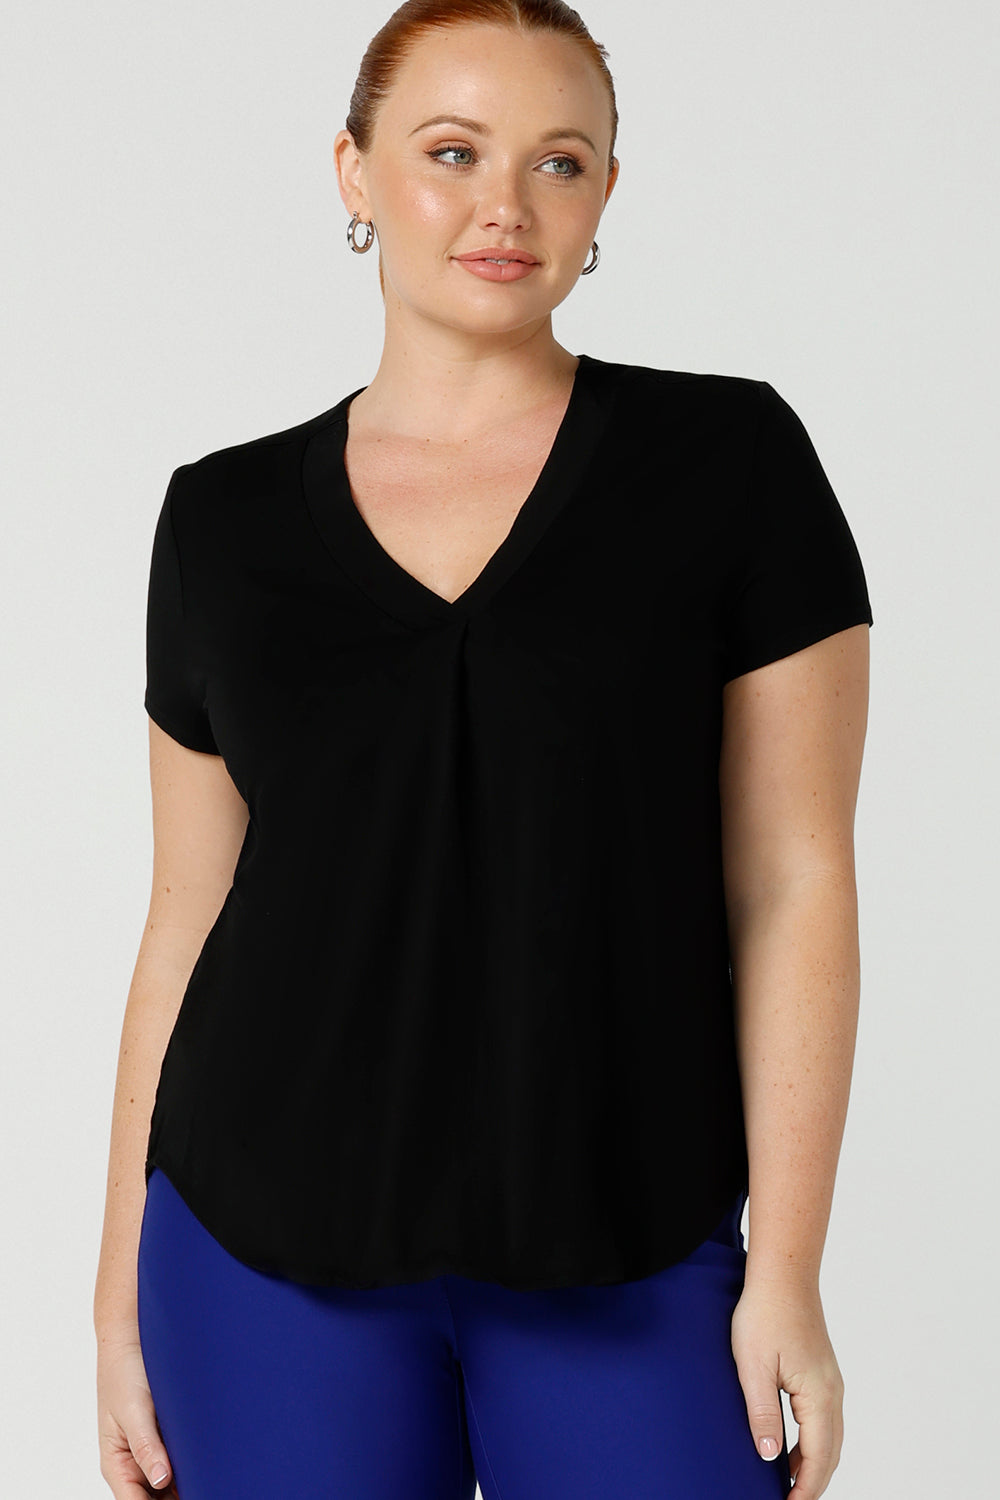 A good top for your capsule wardrobe, this V-neck top with short sleeves makes for a good office wear top for women, as well as a comfortable casual top. Shown on a size 12 woman, this top is made for curvy women by Australian women's clothing brand, Leina & Fleur. Shop black tops for women in sizes 8 to 24 in their online fashion boutique.